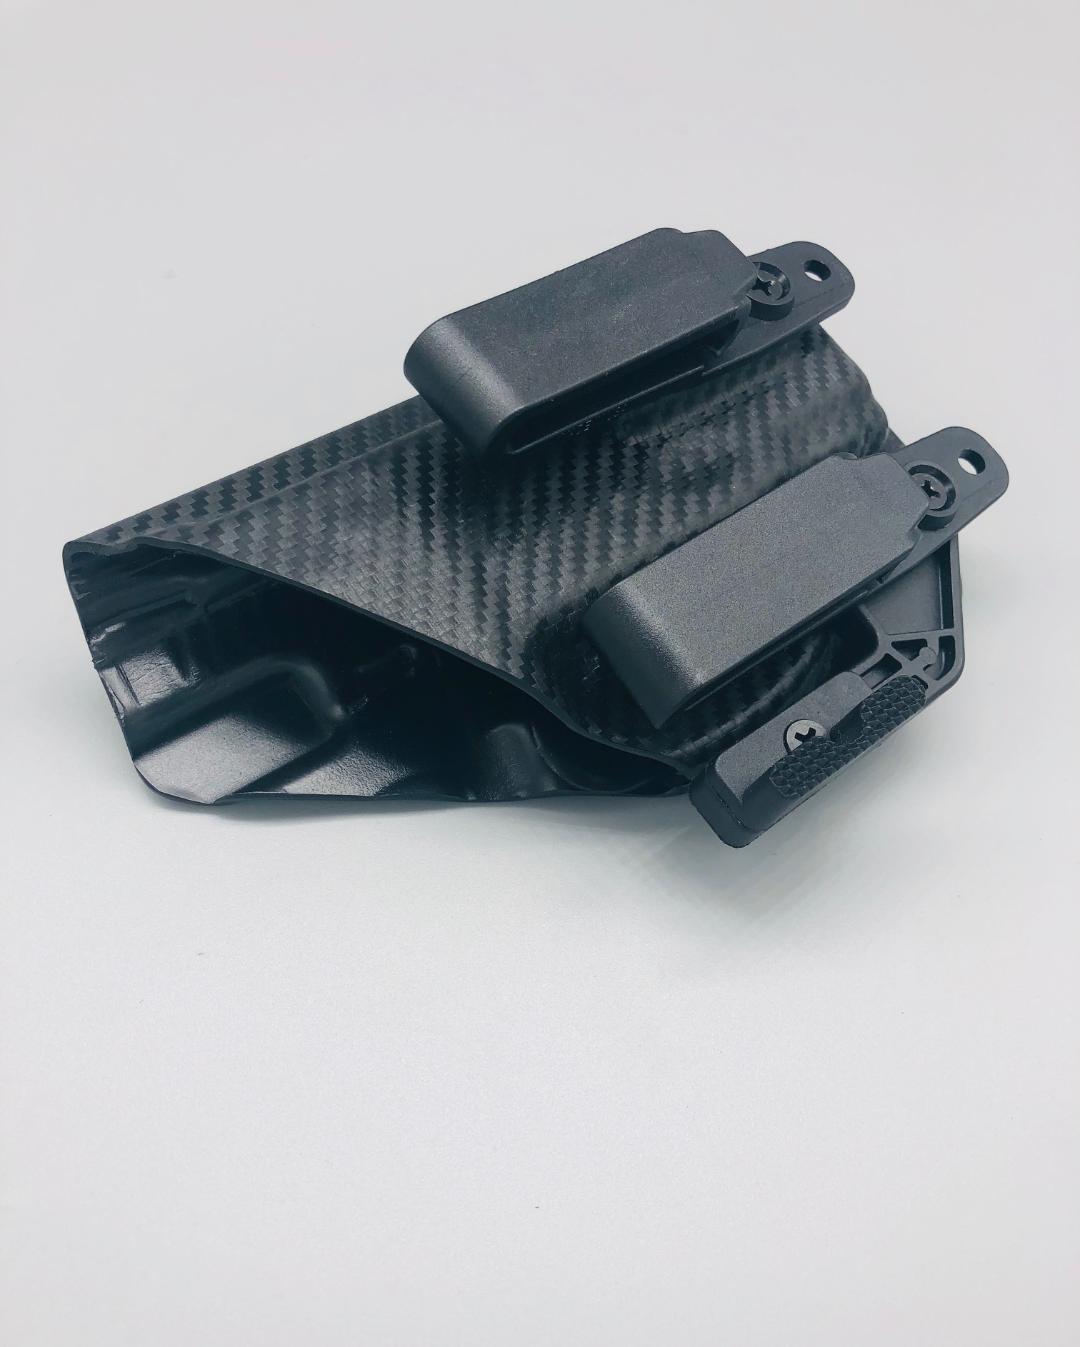 Neptune Concealment IWB Kydex Holster for HK VP9 Veteran Made in USA Triton 2.0 Series w/ Mod Wing 